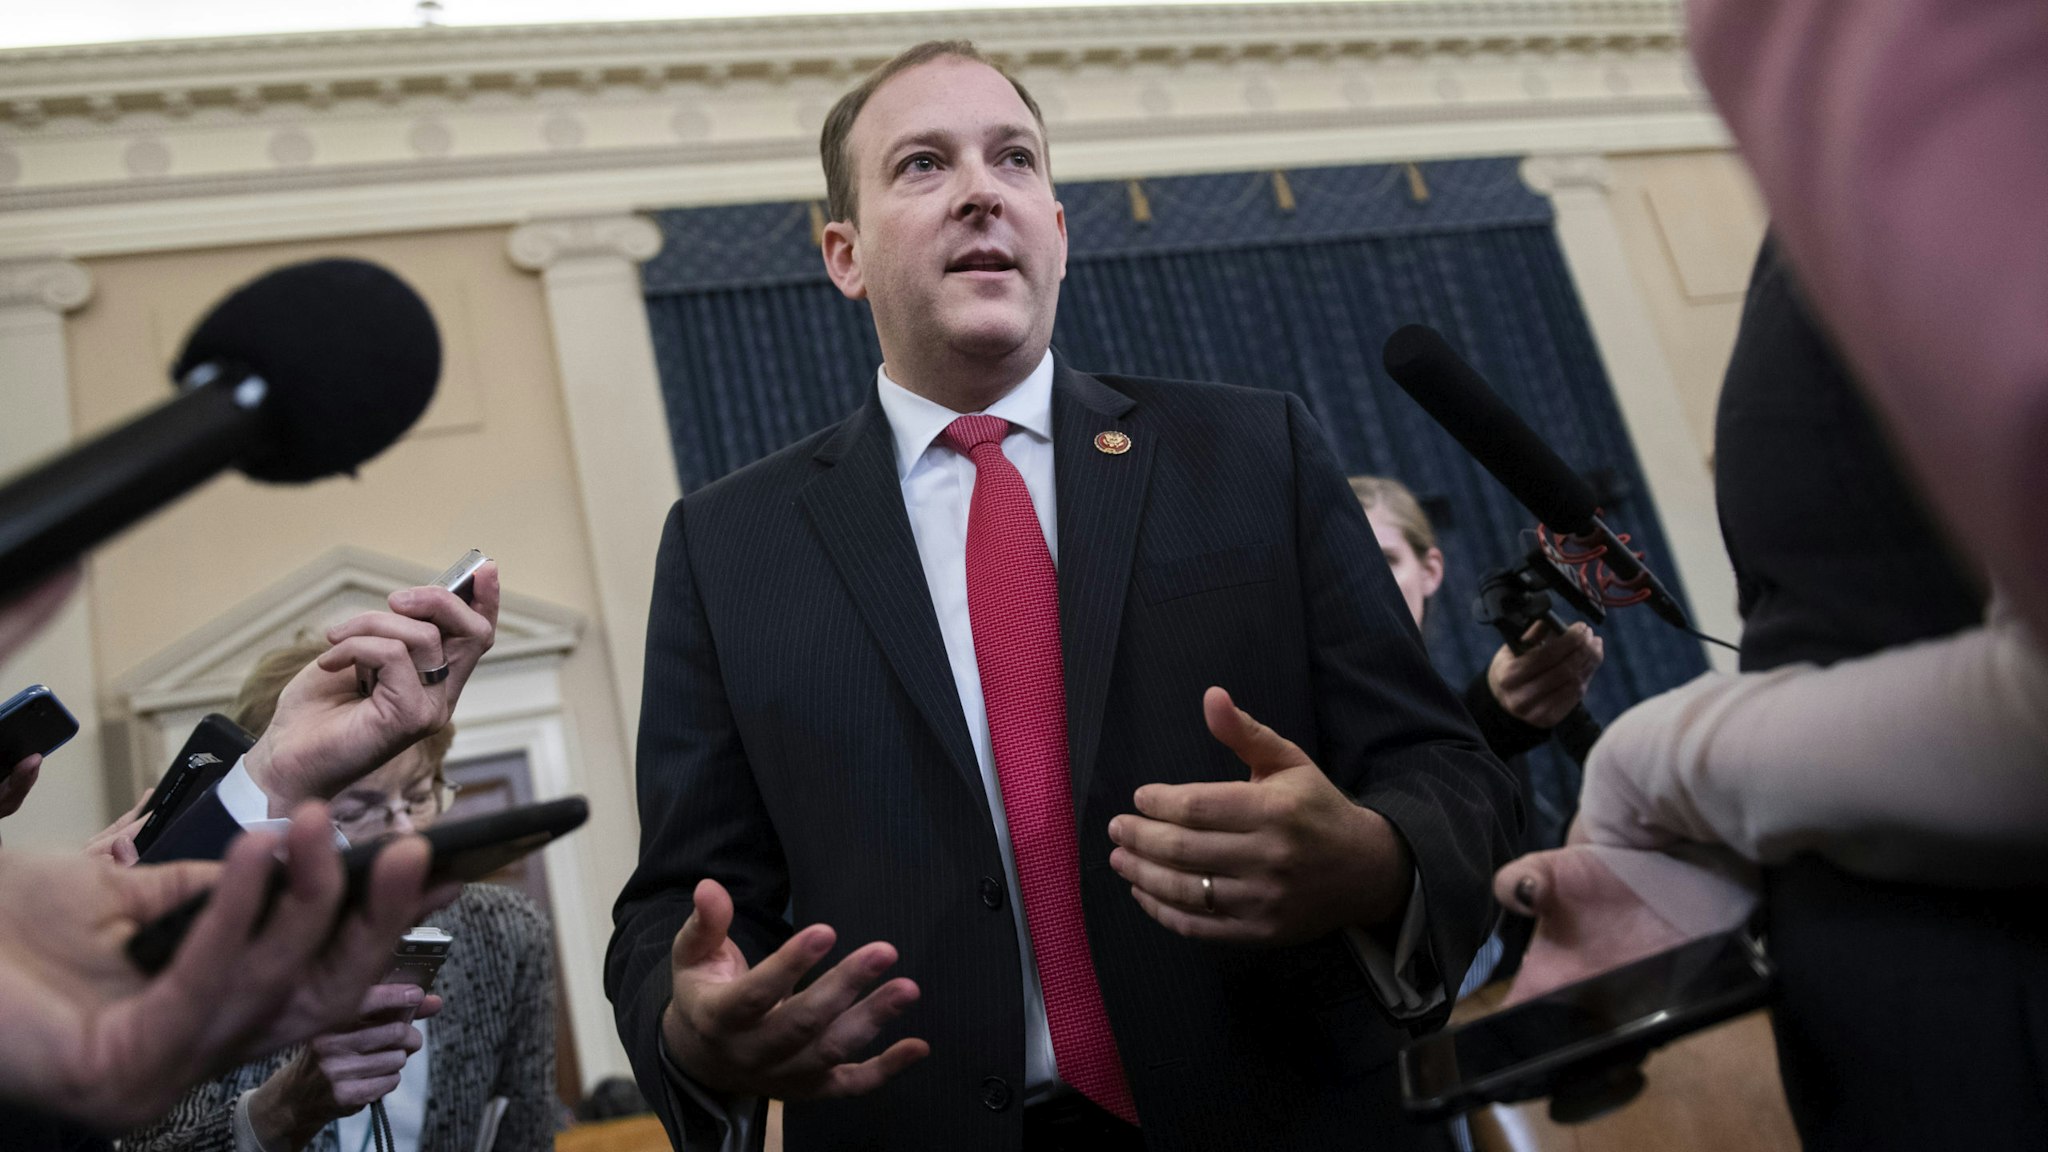 UNITED STATES - NOVEMBER 20: Rep. Lee Zeldin, R-N.Y., talks with reporters during a break in the the House Intelligence Committee hearing on the impeachment inquiry of President Trump featuring testimony by Gordon Sondland, U.S. ambassador to the European Union, in Longworth Building on Wednesday, November 20, 2019.